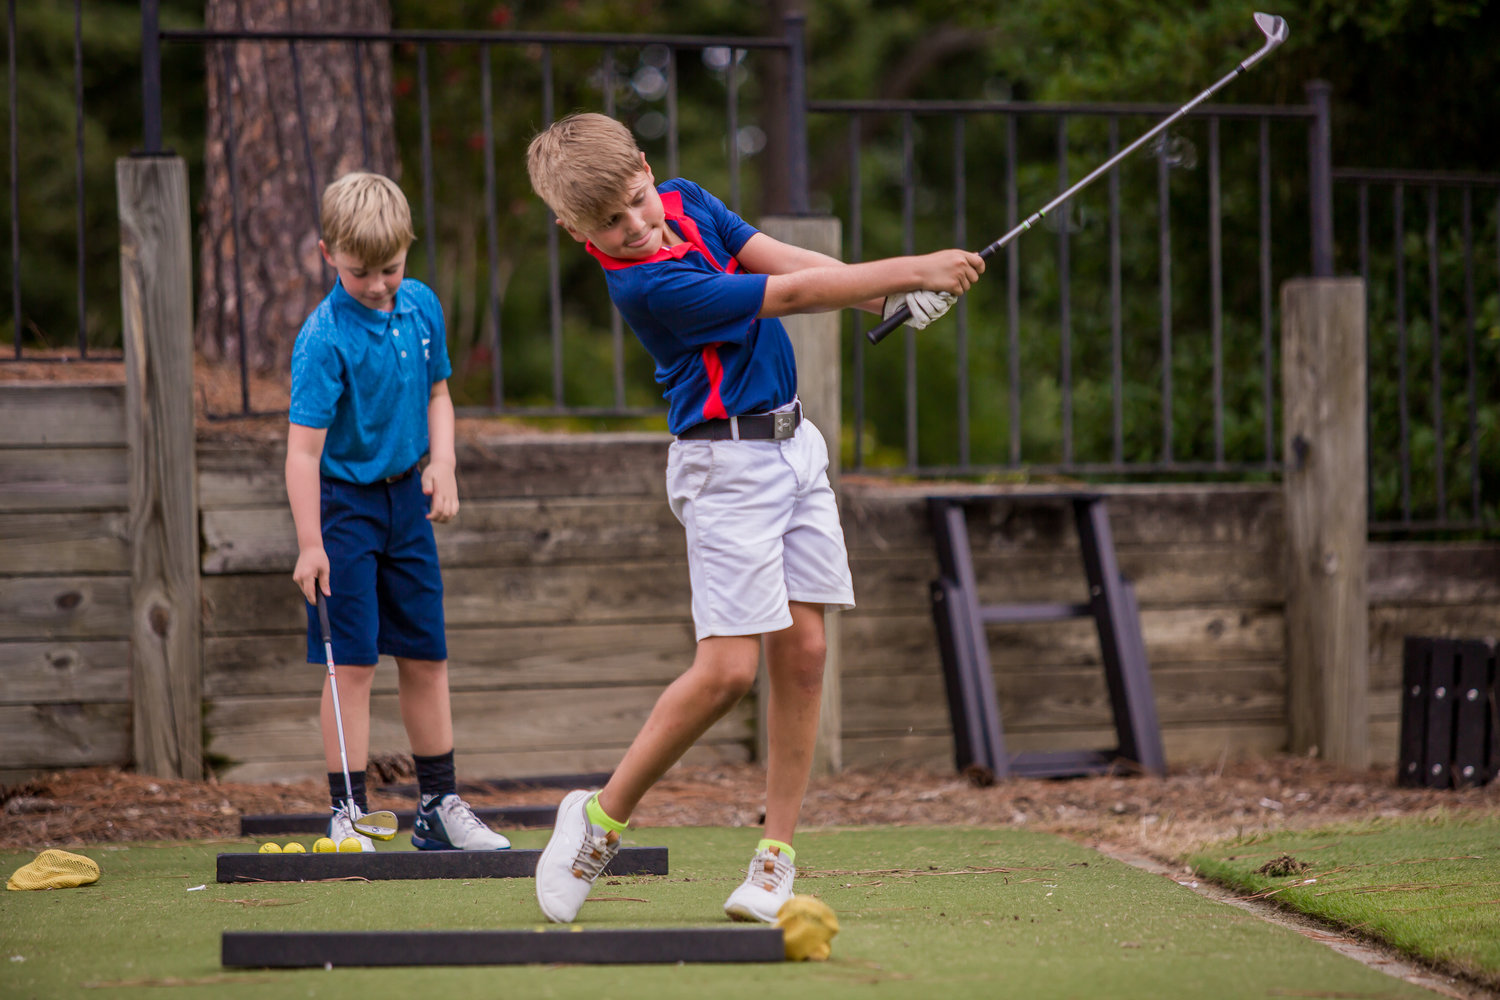 Golf camps can focus on the basic fundamentals.